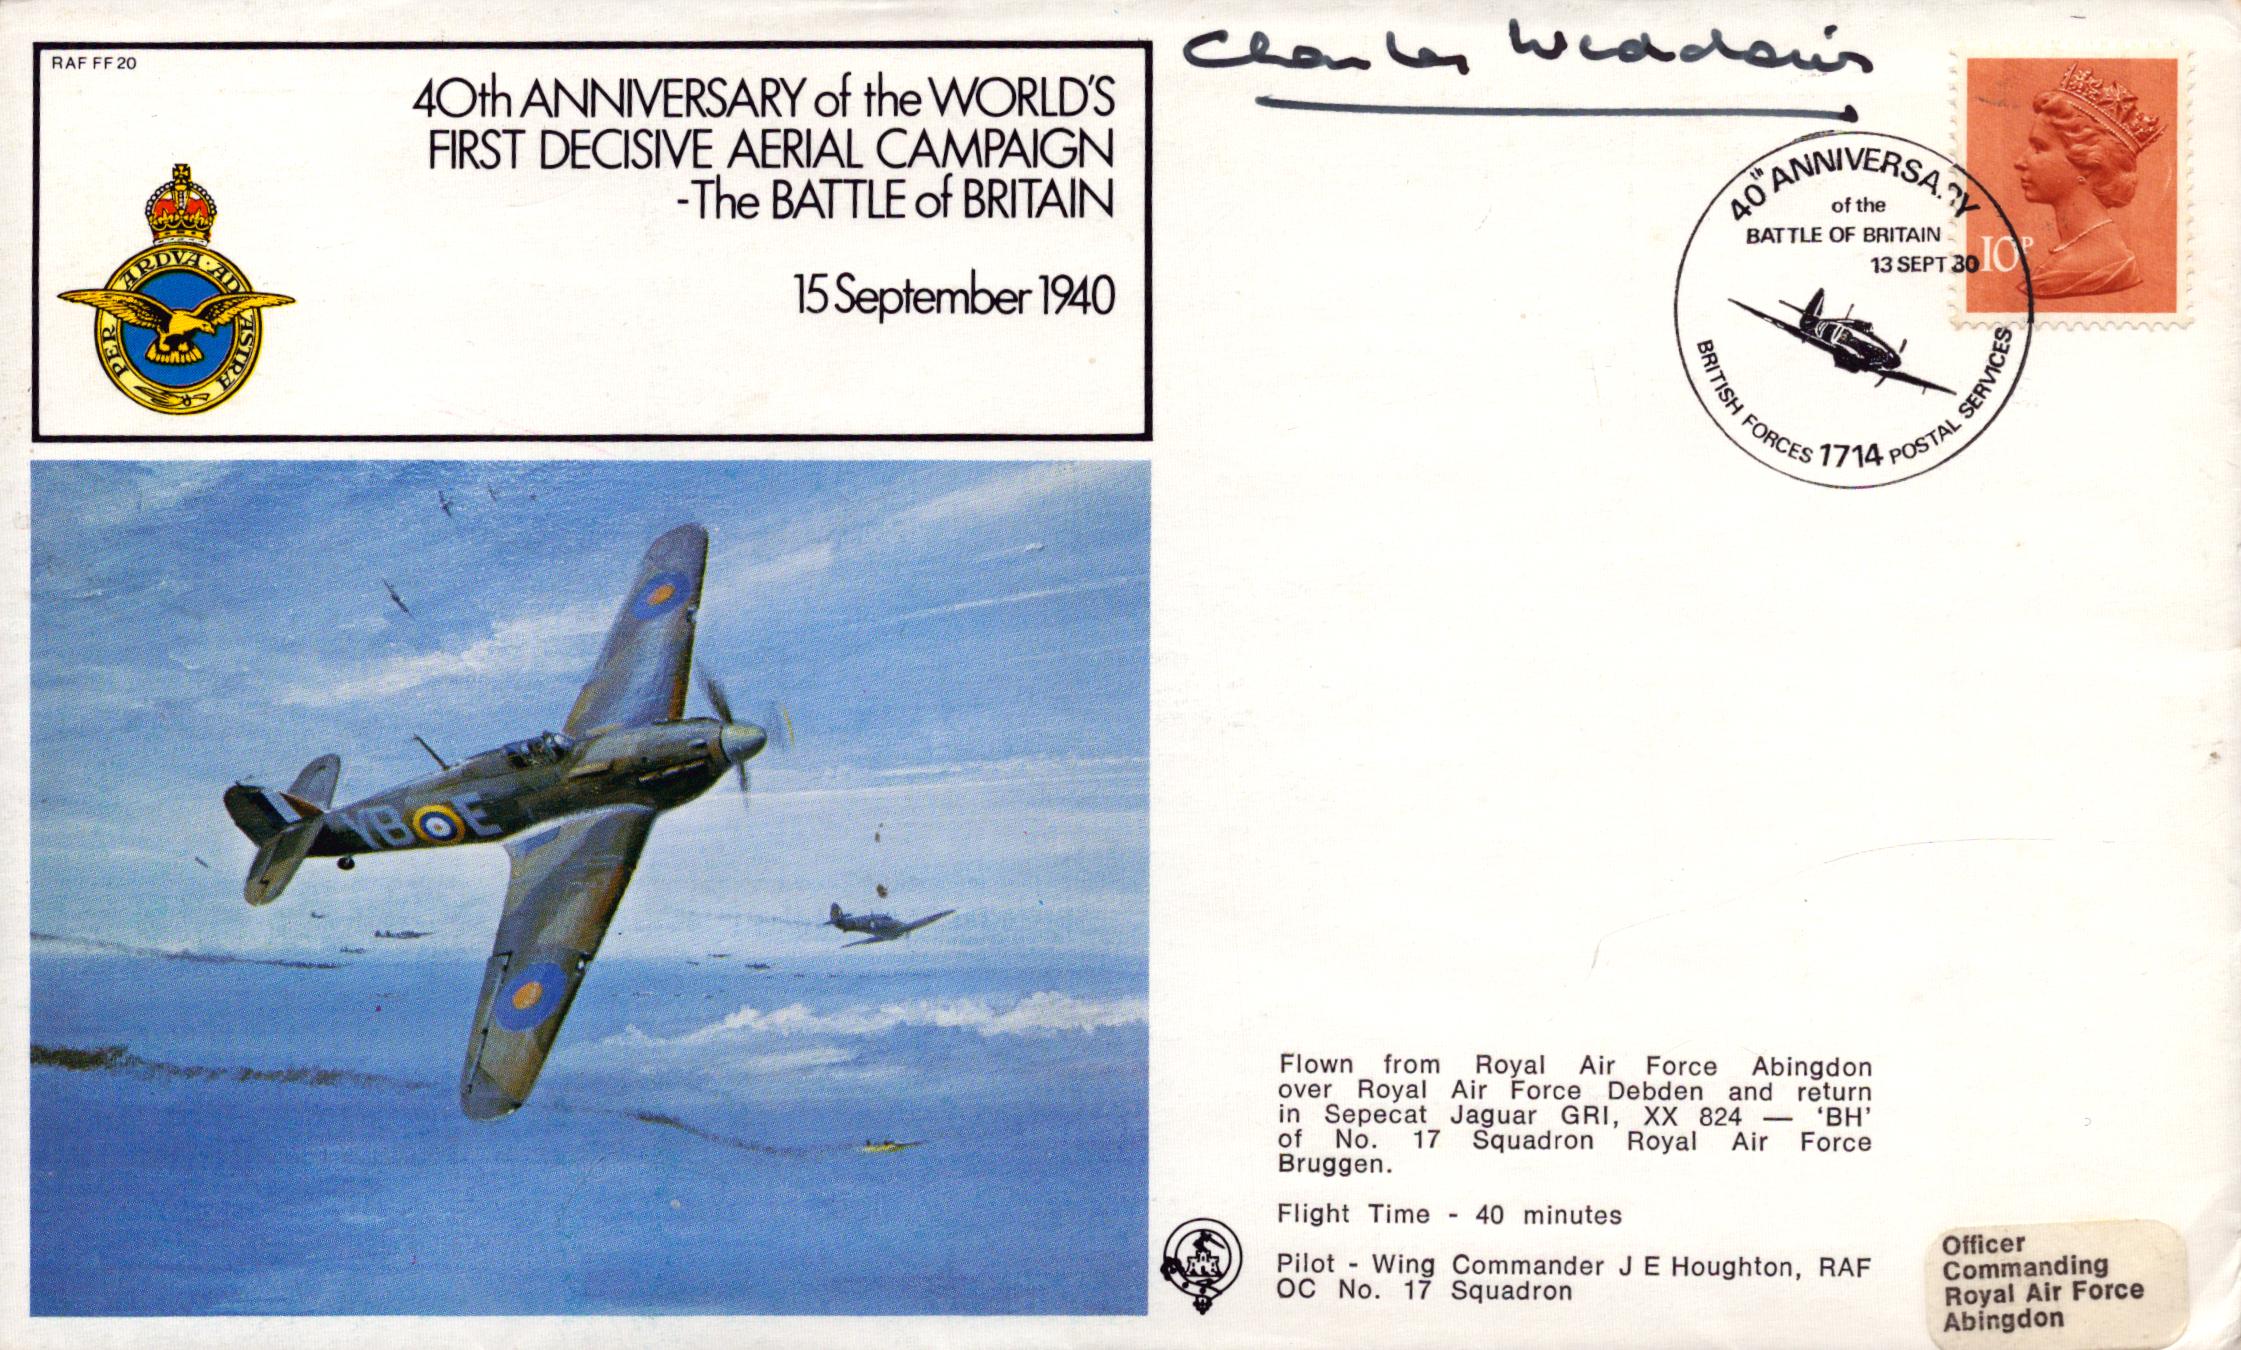 WWII BOB Air Commodore Charles Widdows signed 40th Anniversary of the World's First Decisive